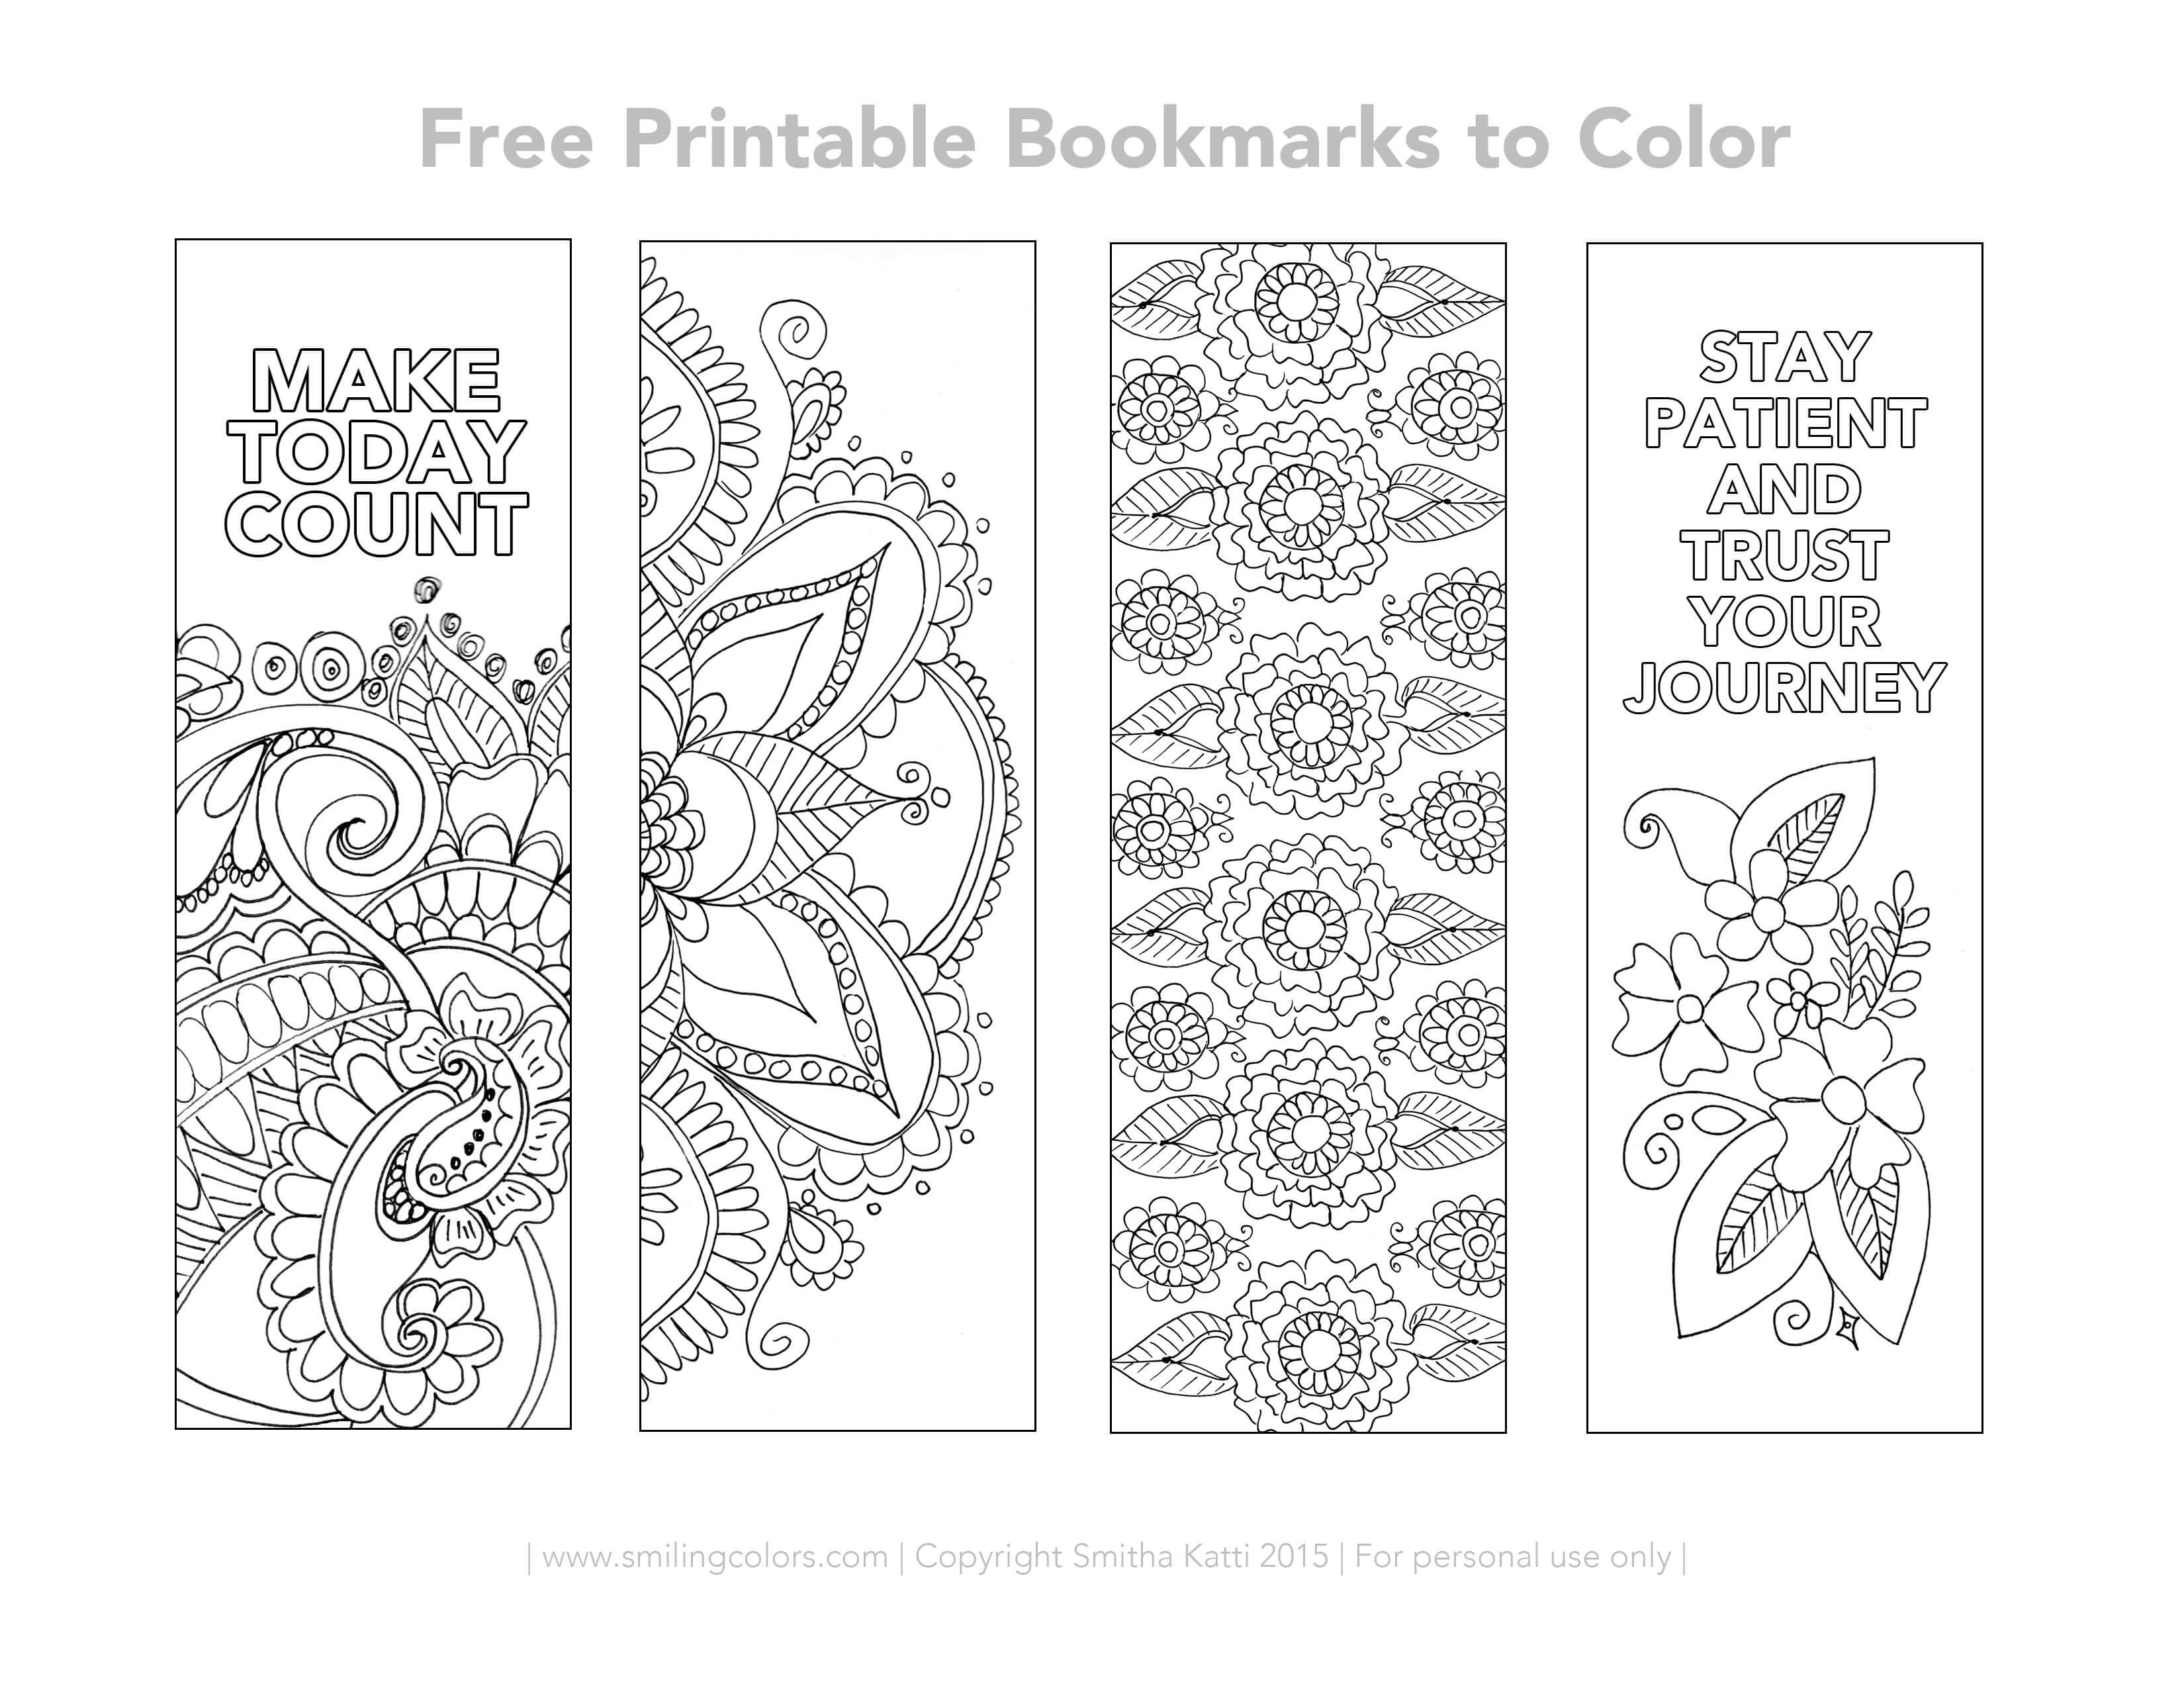 Free Printable Bookmarks To Color | Color Me | Free Pertaining To Free Blank Bookmark Templates To Print